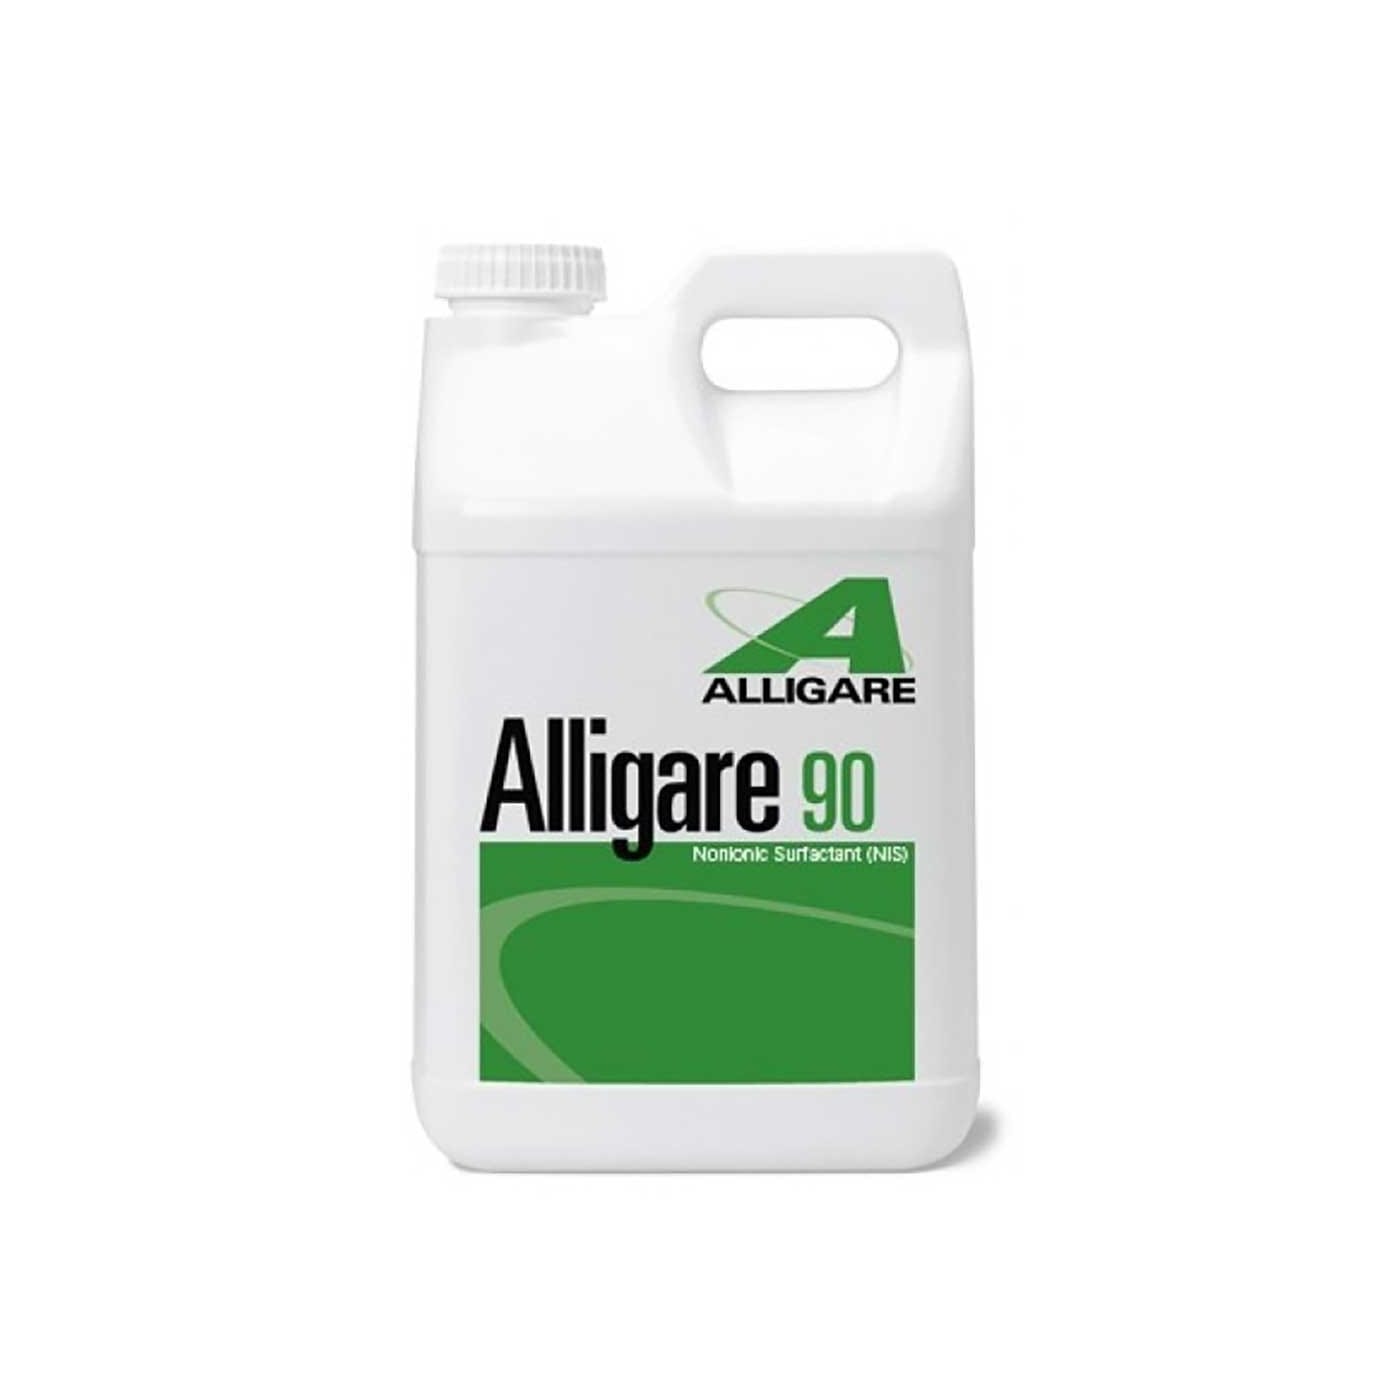 Alligare 90 Non-Ionic Surfactant